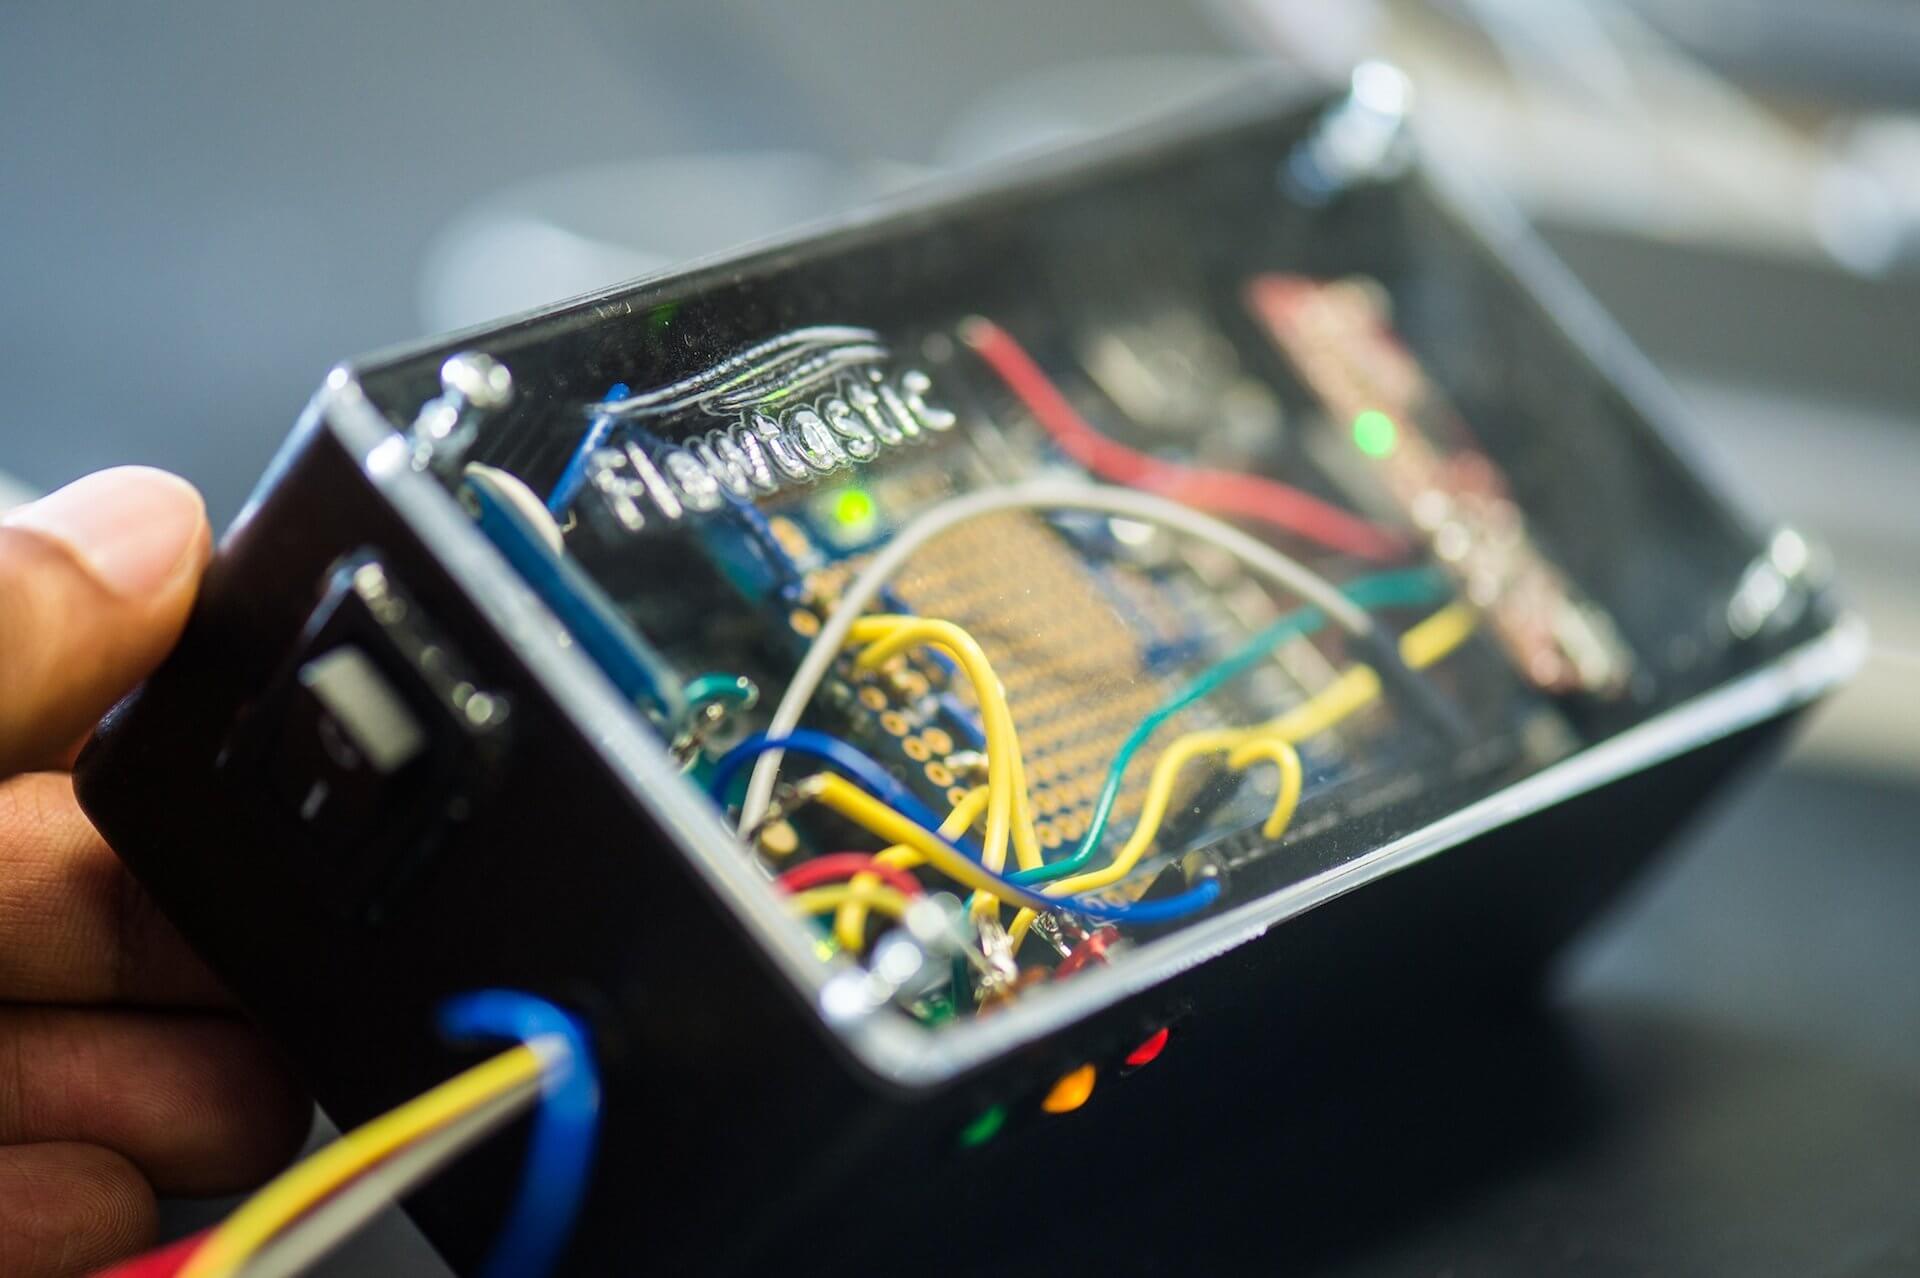 The Flowtastic team's software and hardware would allow doctors to monitor their patients remotely and even adjust the pump speed. (Credit: Jeff Fitlow/Rice University)